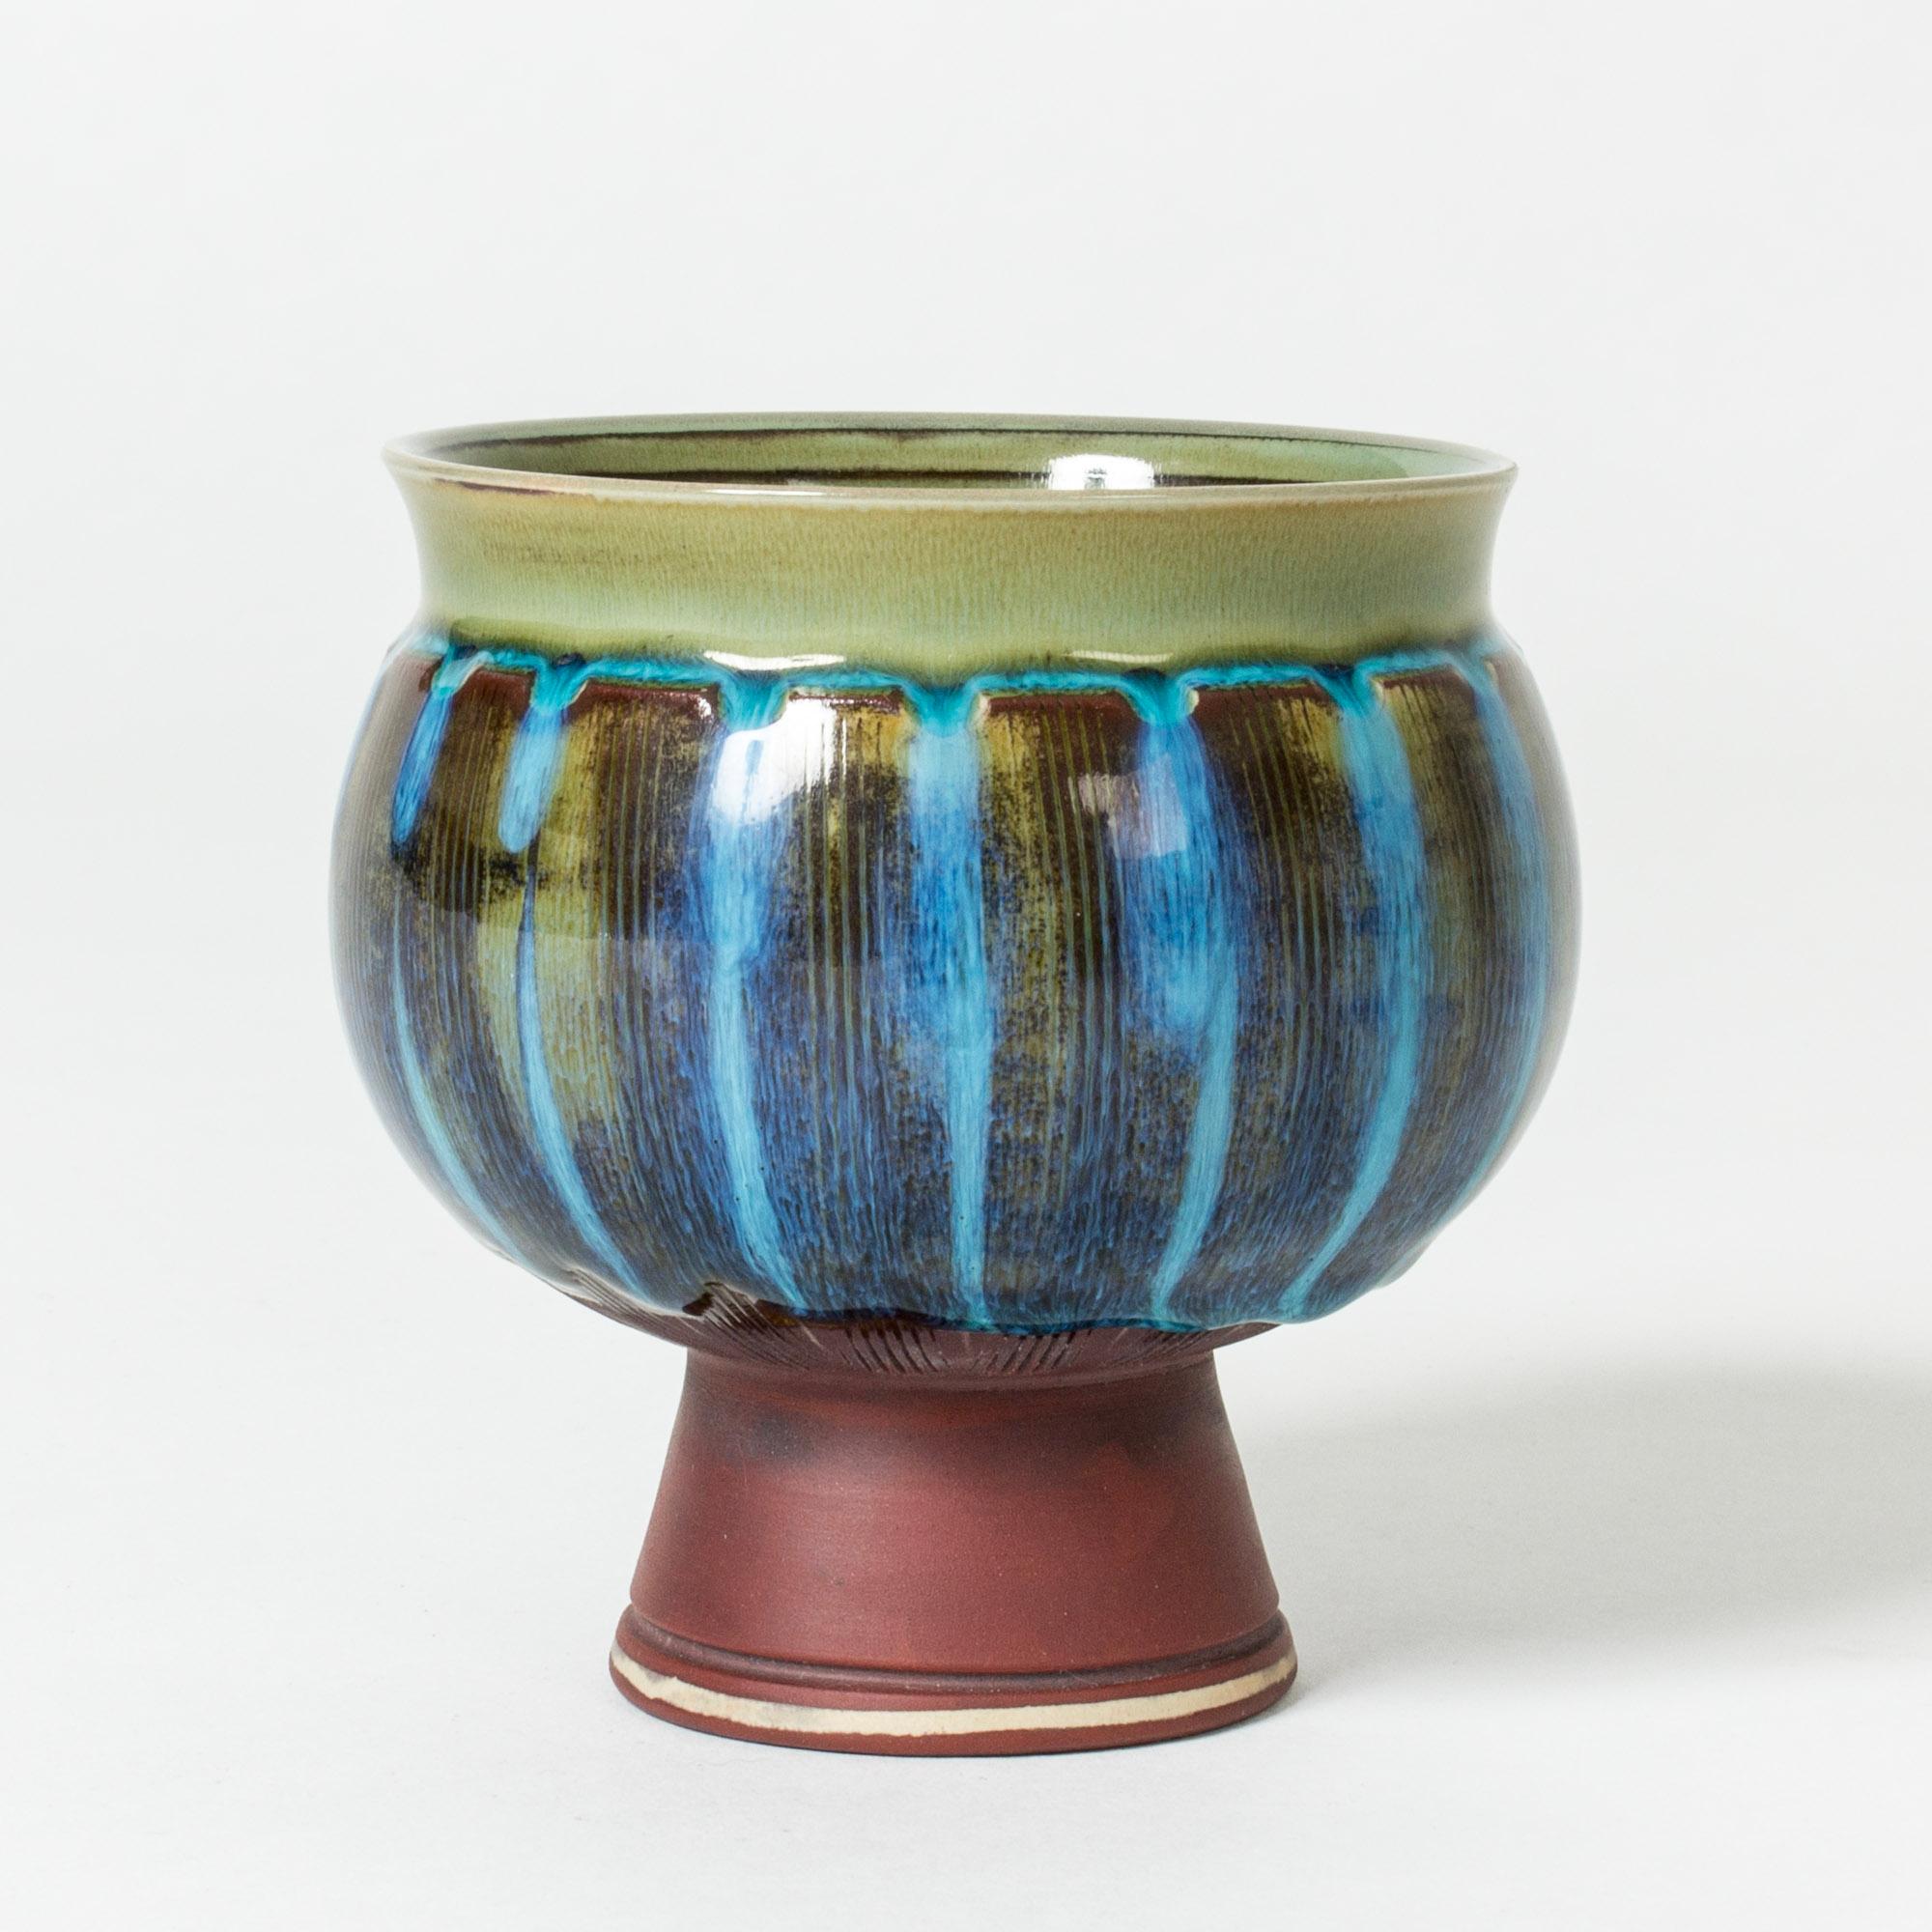 “Farsta” vase with thick, blue glazed walls balancing on an unglazed base decorated with etched stripes. Production year inscripted on the base.

“Farsta” stoneware is recognized as being the best and most exclusive that has come out of Swedish arts